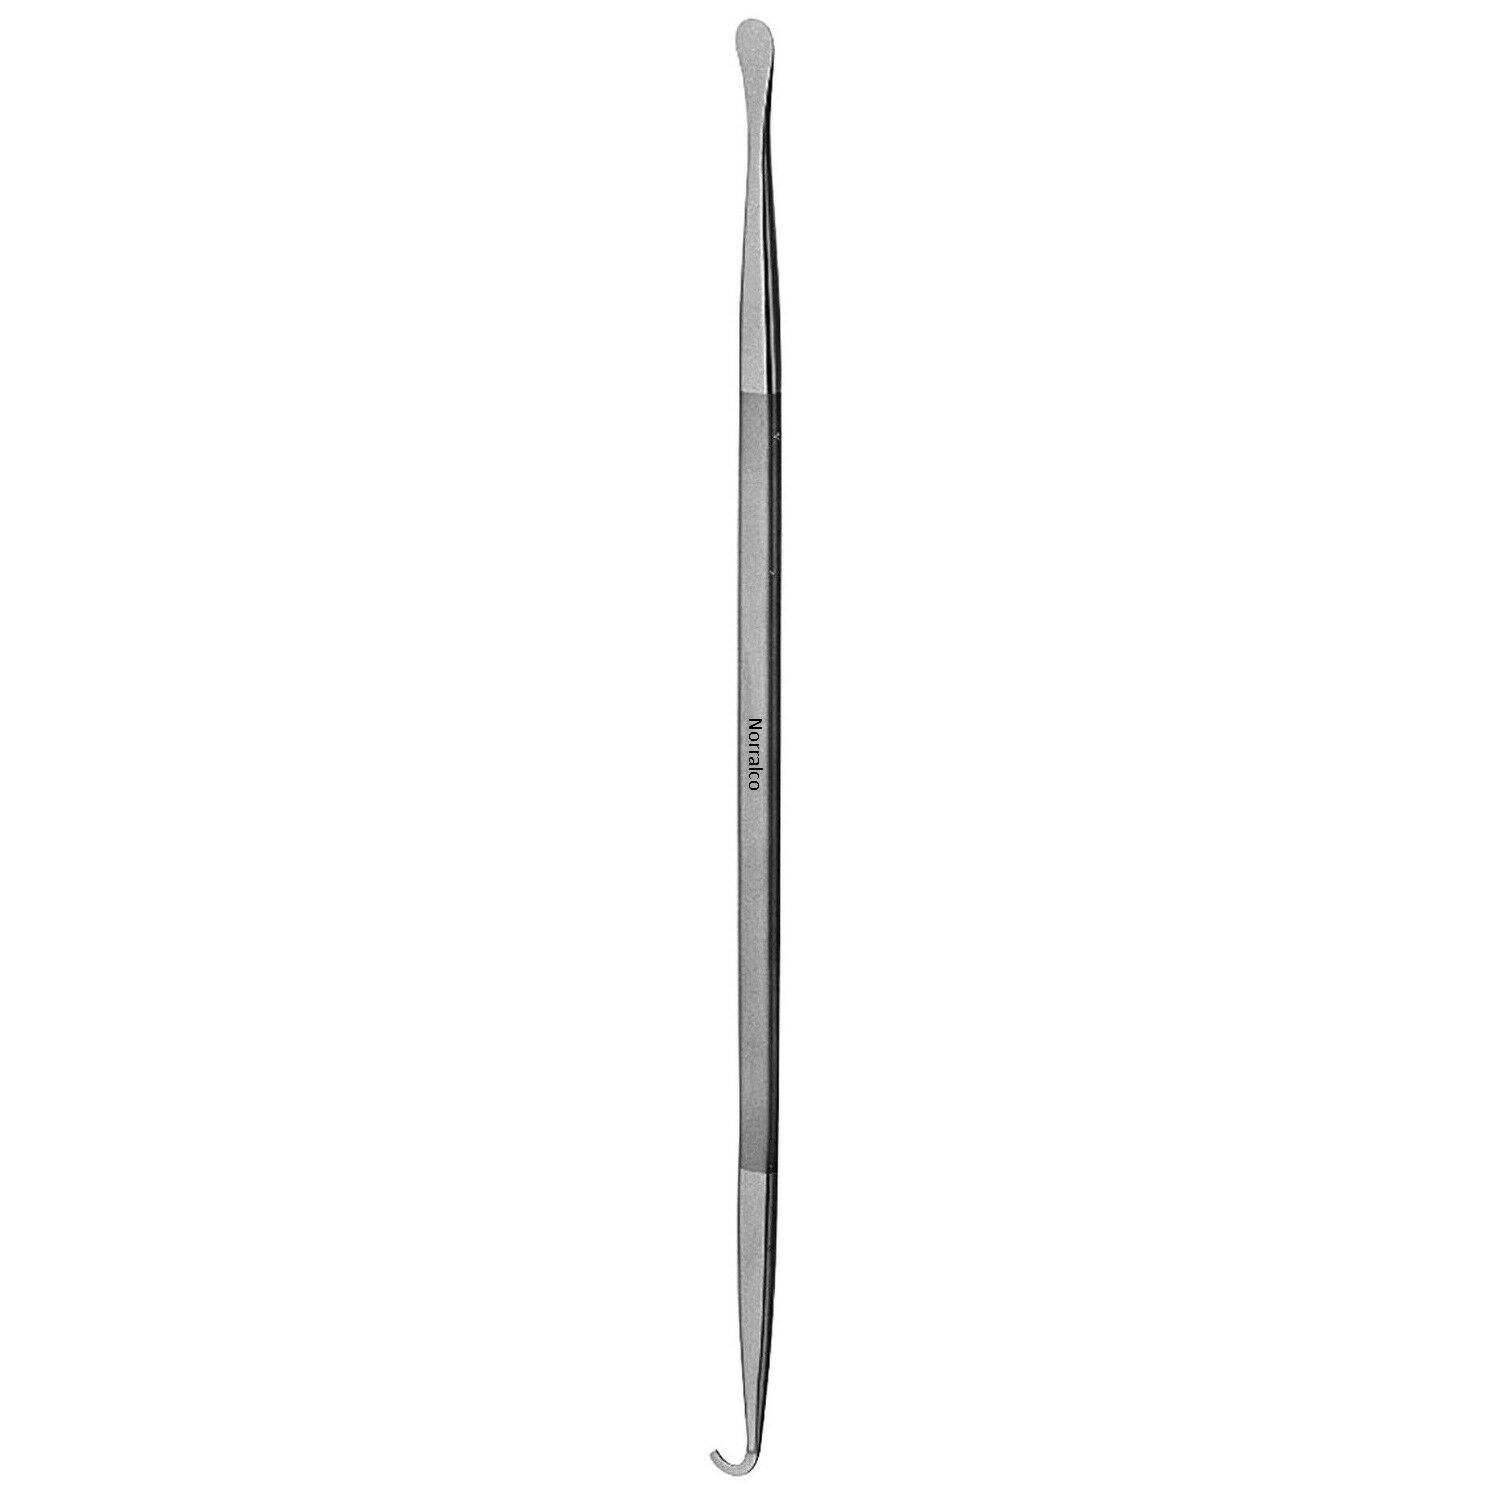 Crile Hook & Dissector, 8", Double Ended, Premium Stainless